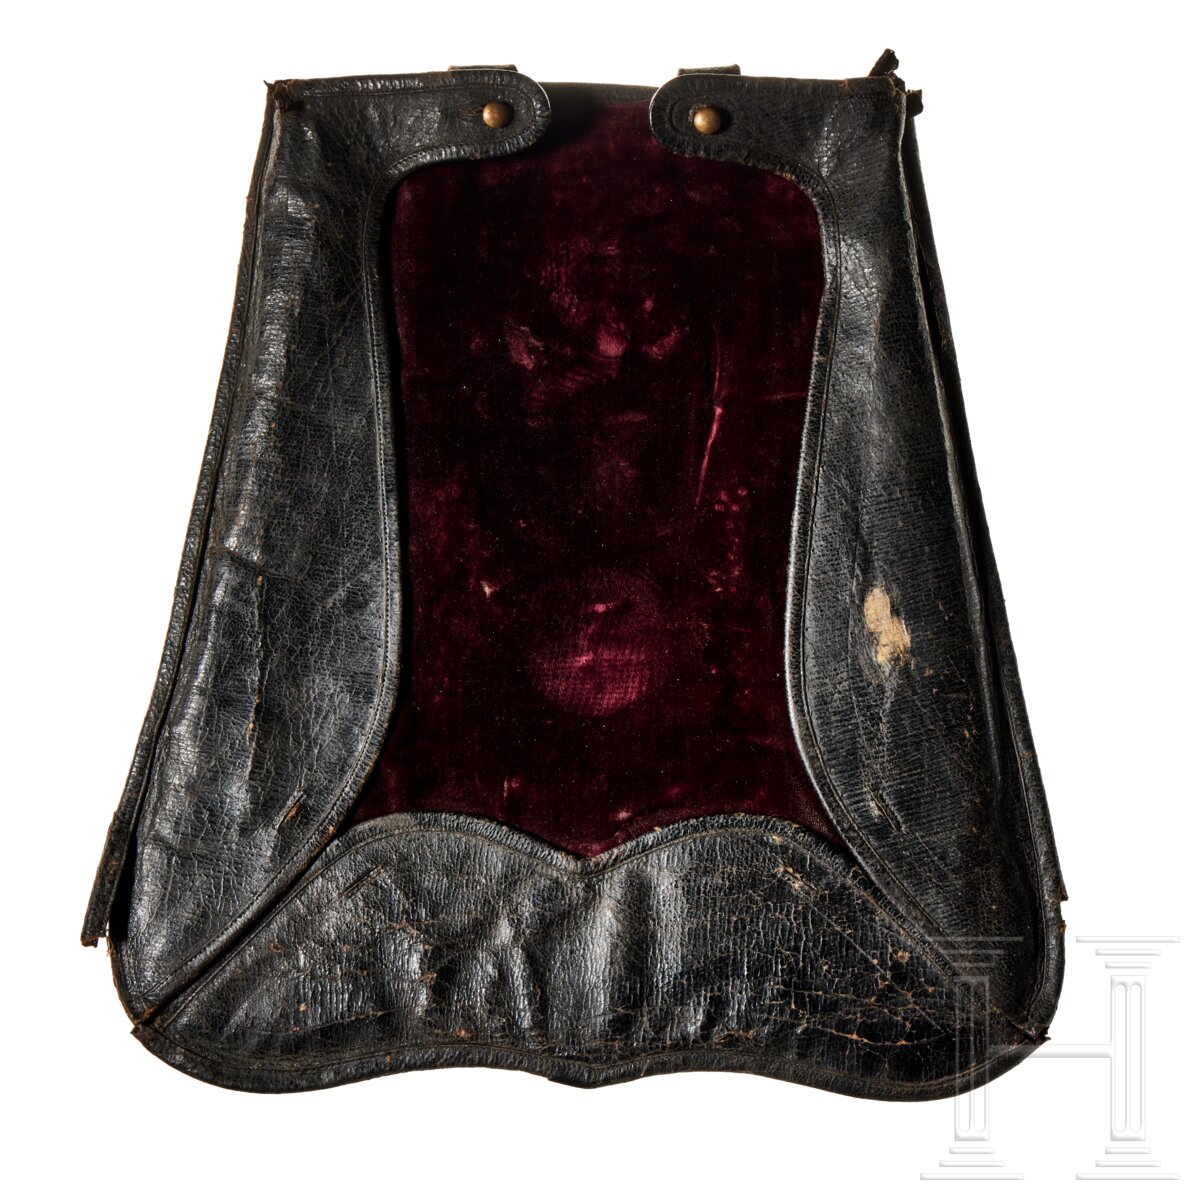 A "Säbeltasche" (sabretache) weather cover for Prussian Hussar Officers